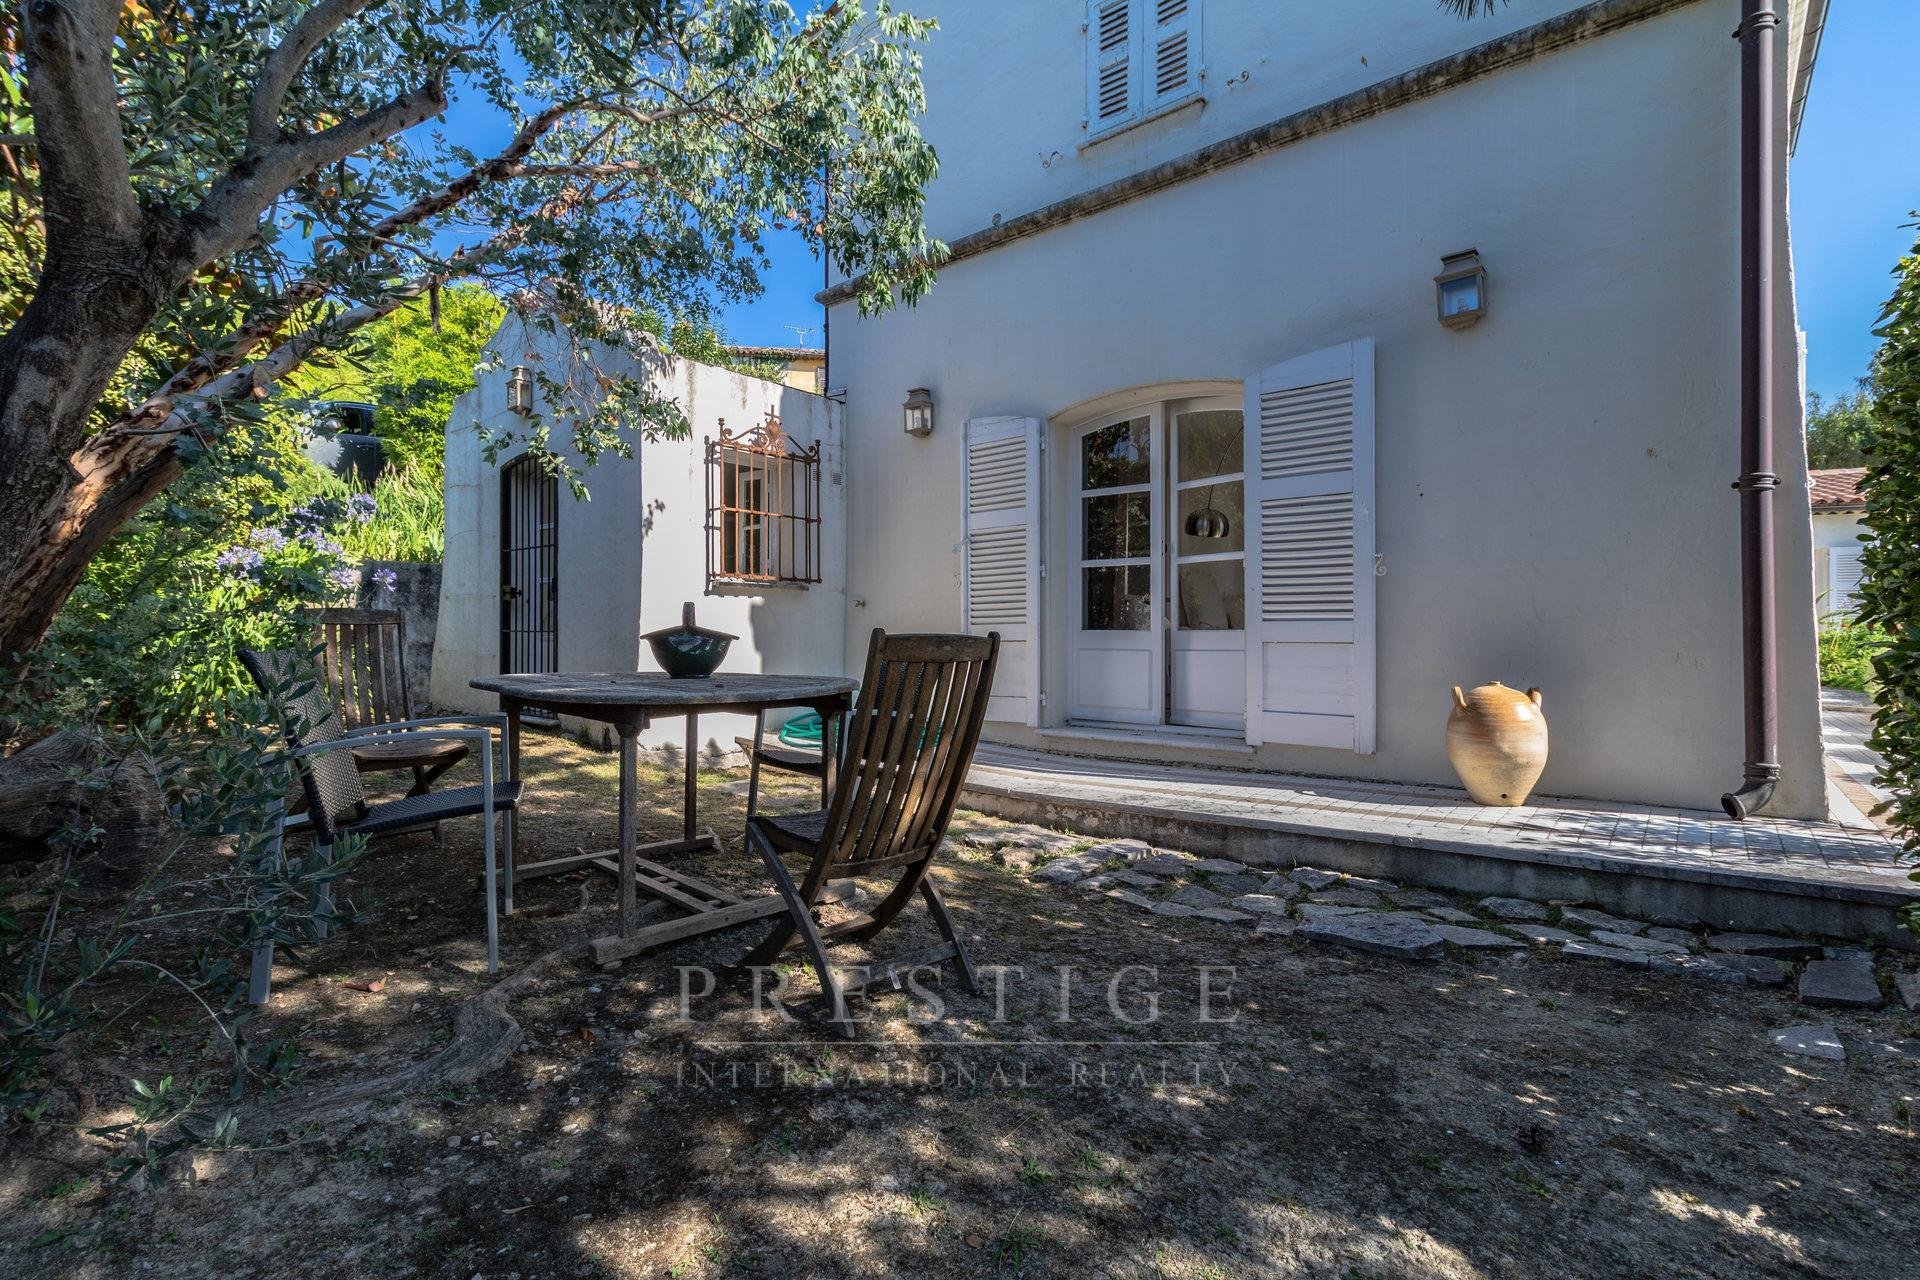 314 sqm property in La Colle-sur-Loup with pool